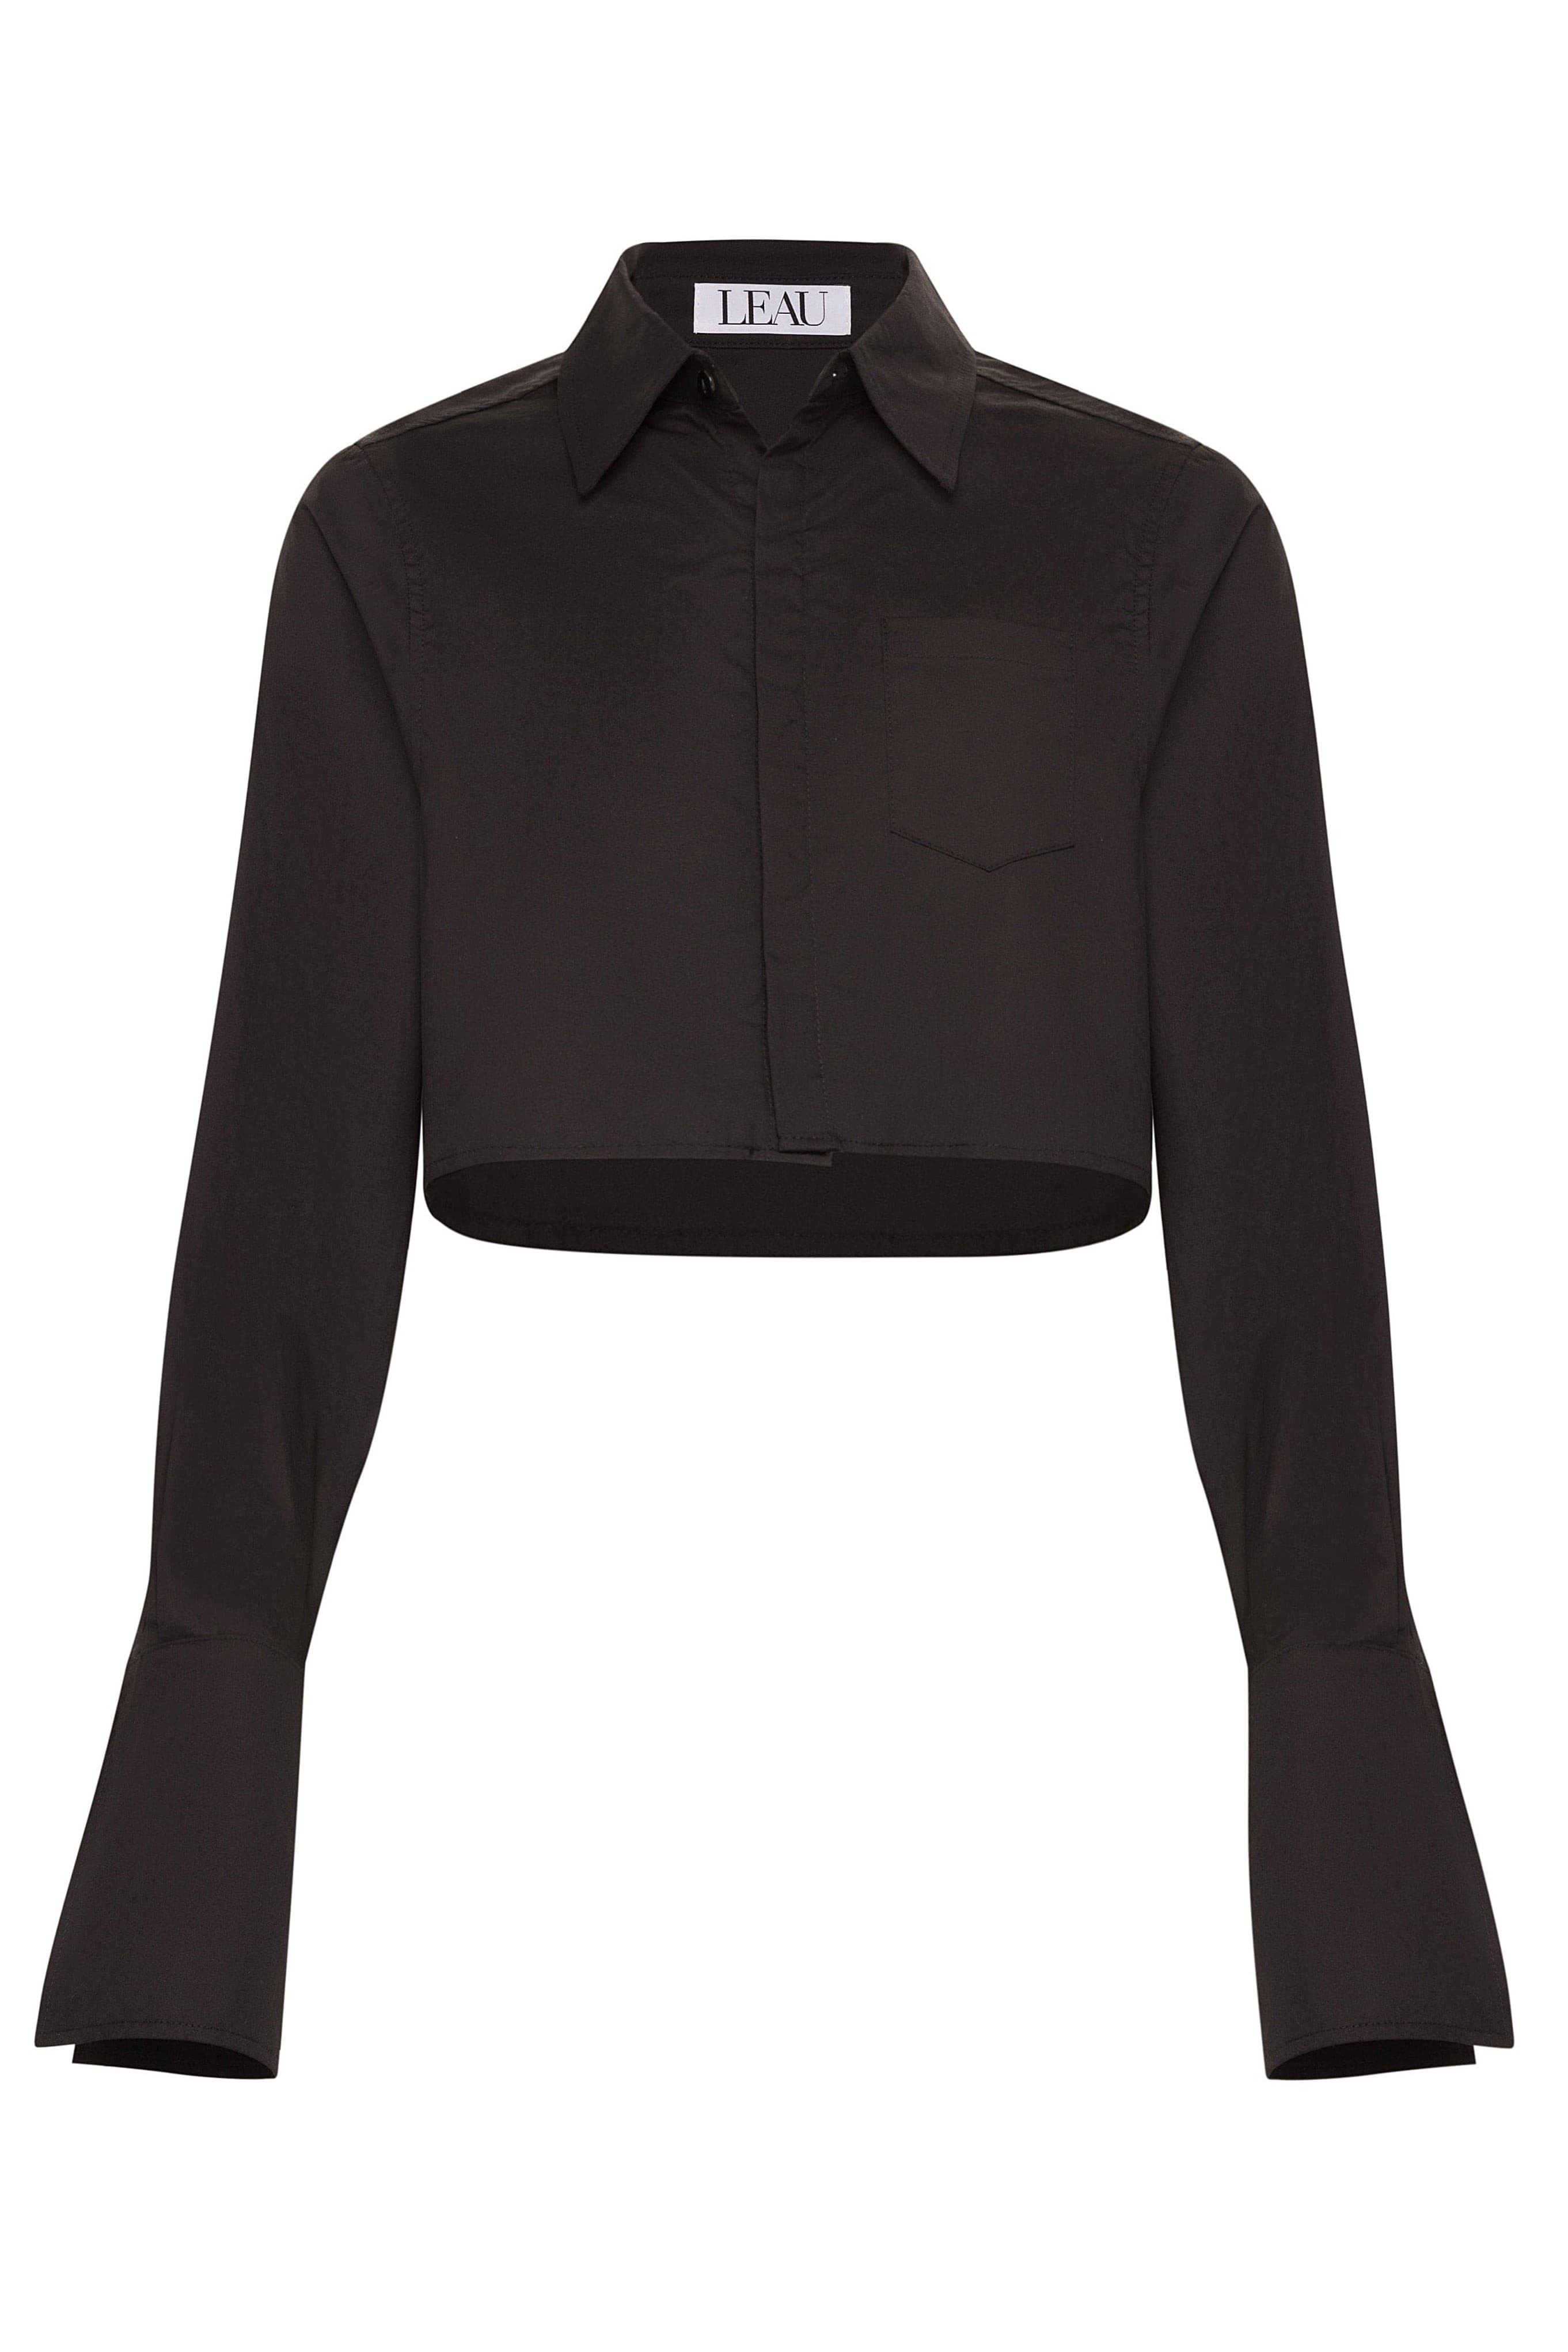 Coval Cropped Button Up Top - Black.